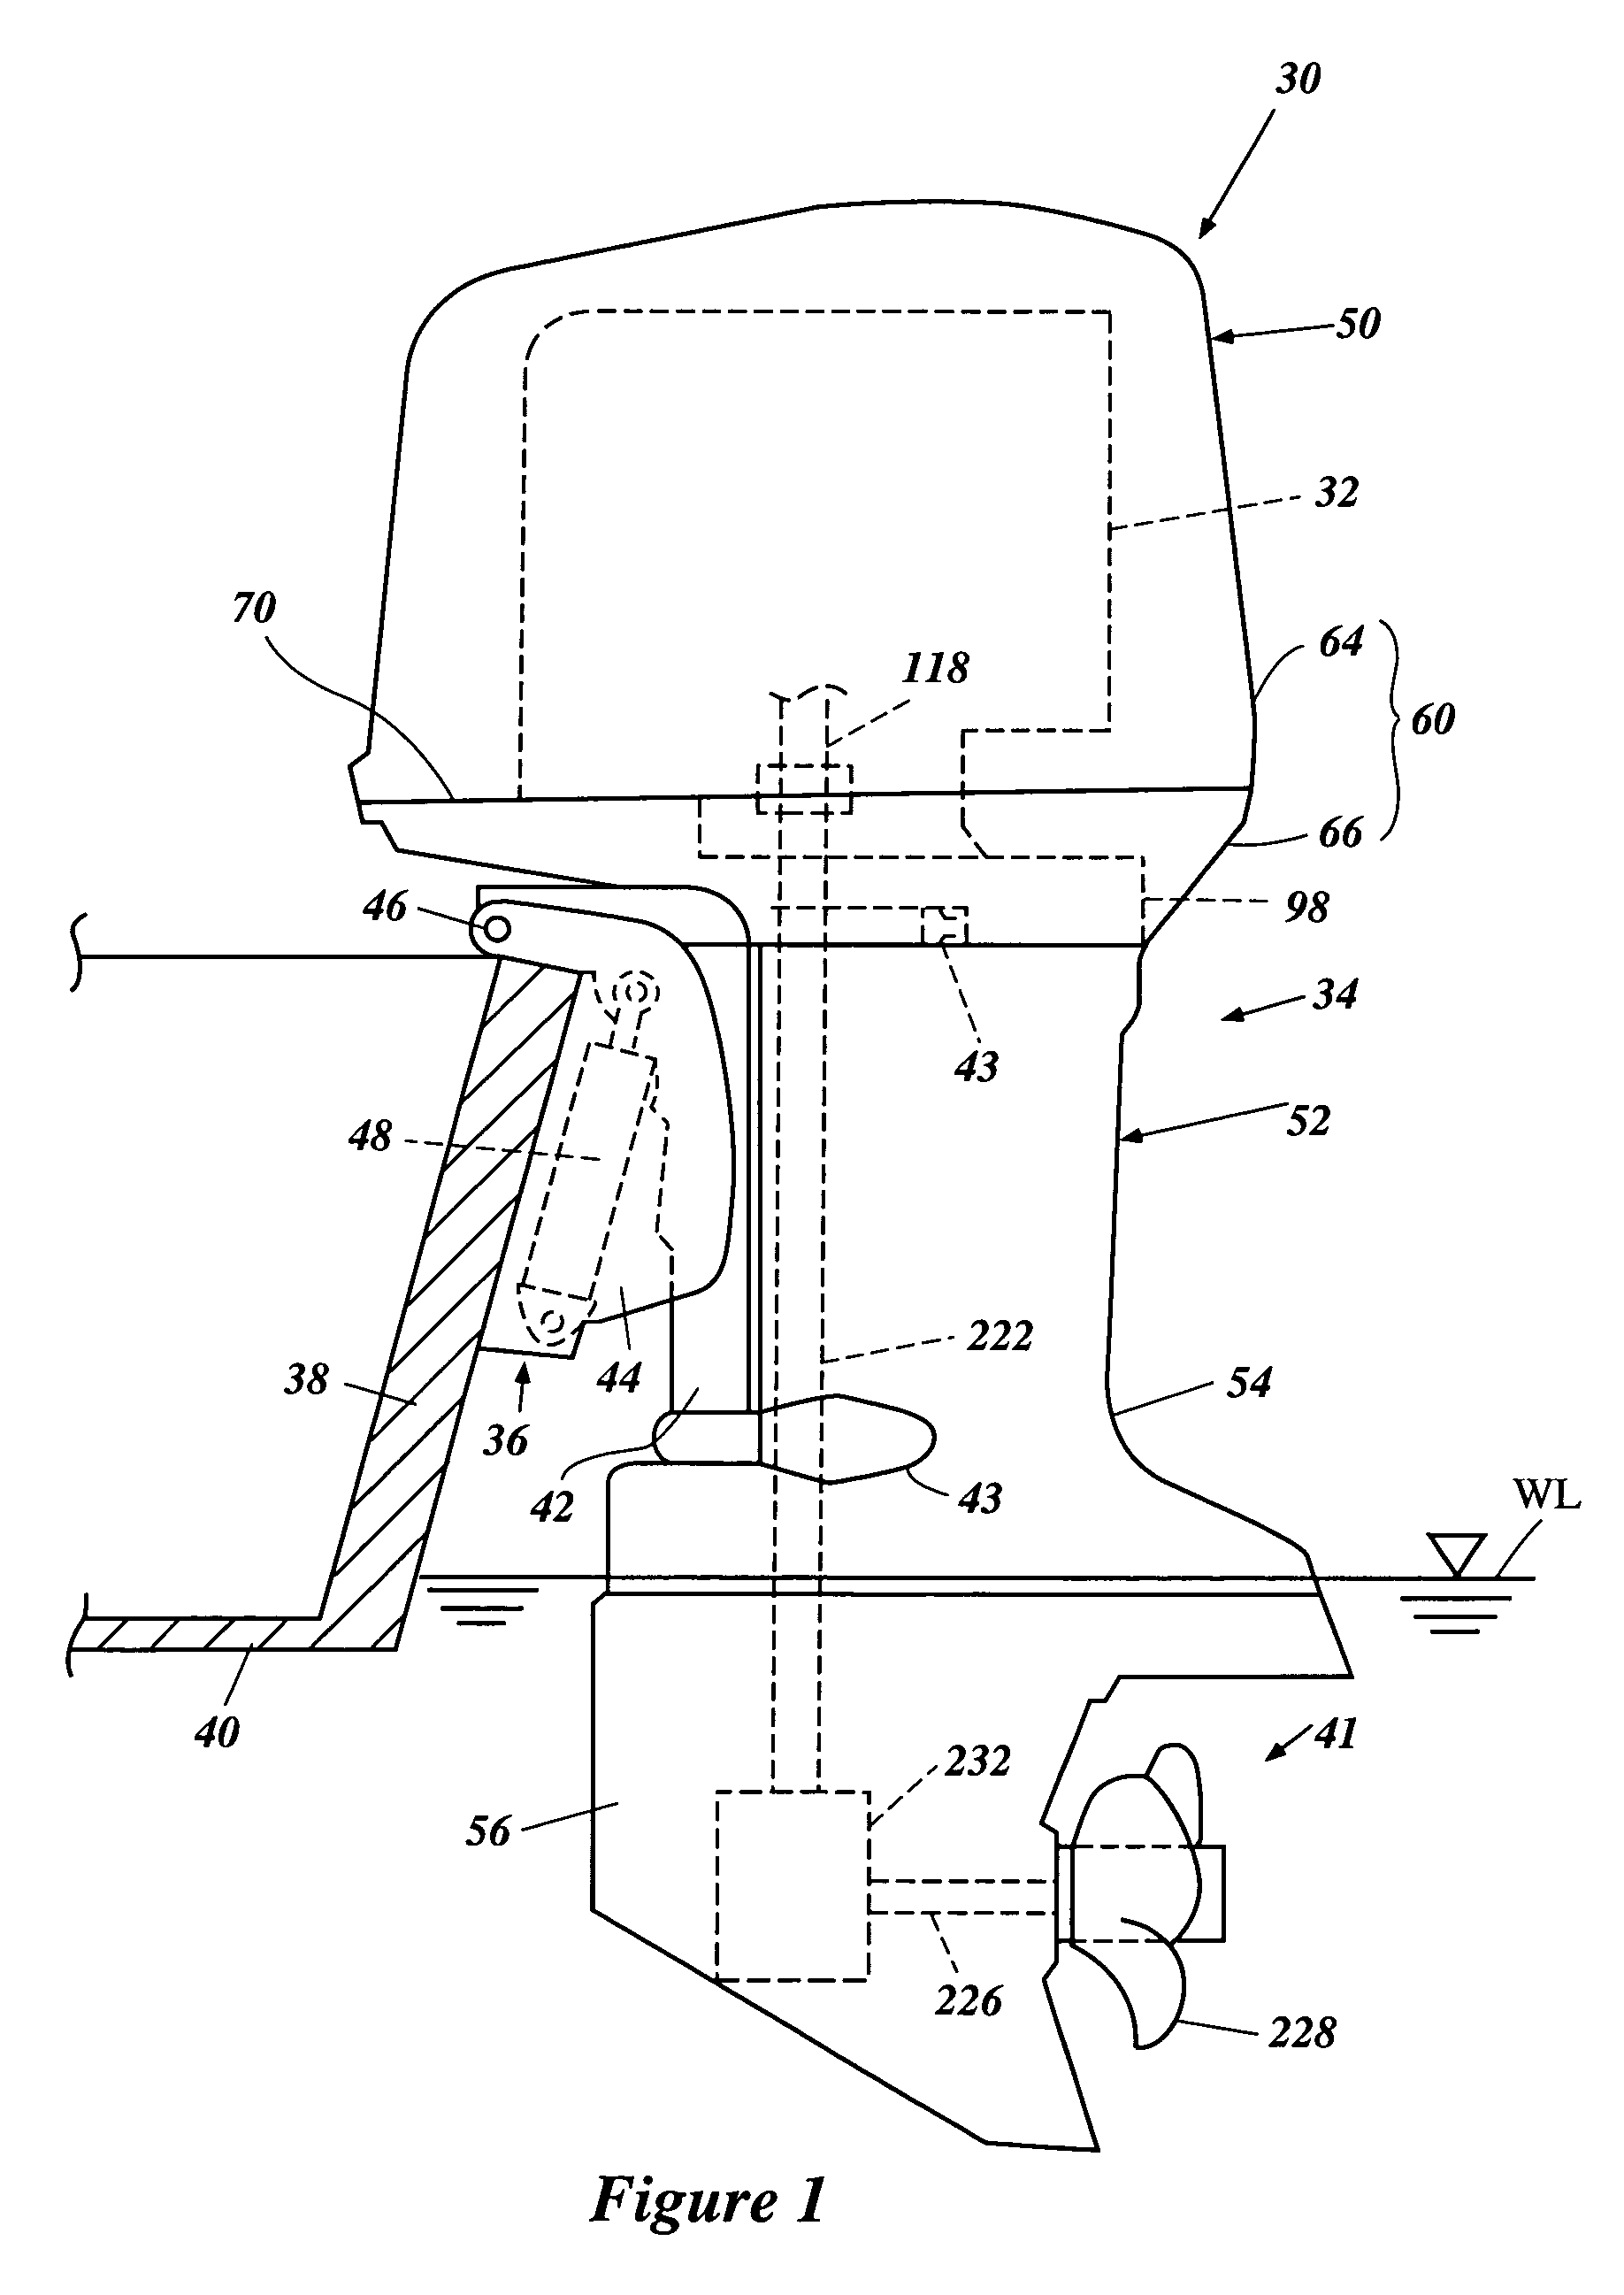 Knocking avoidance control system of a four-stroke engine for an outboard motor